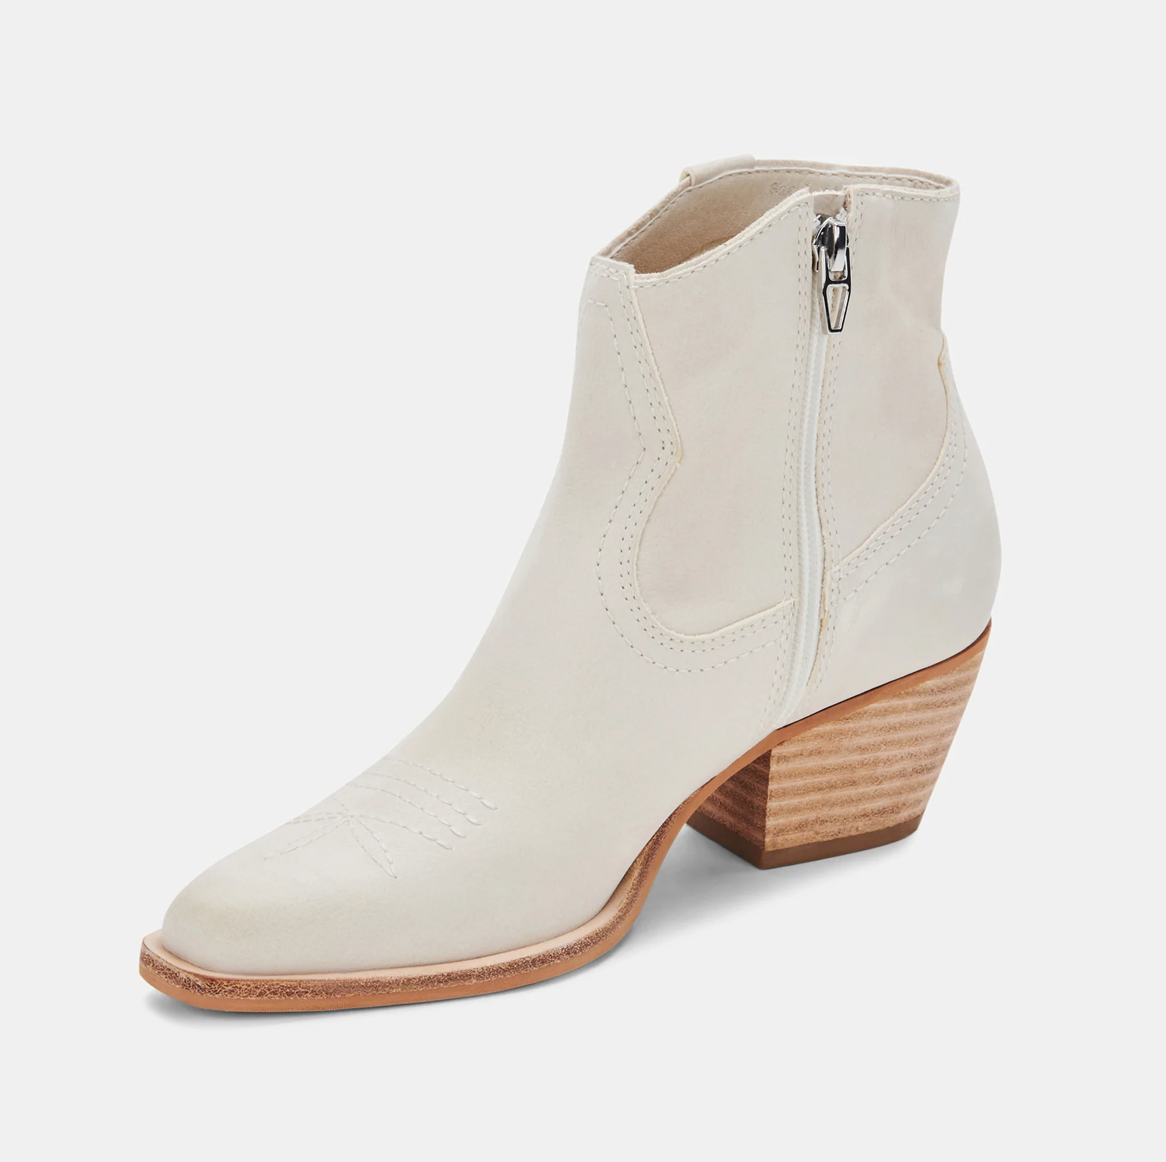 SILMA BOOTIES By Dolce Vita (2 colors)